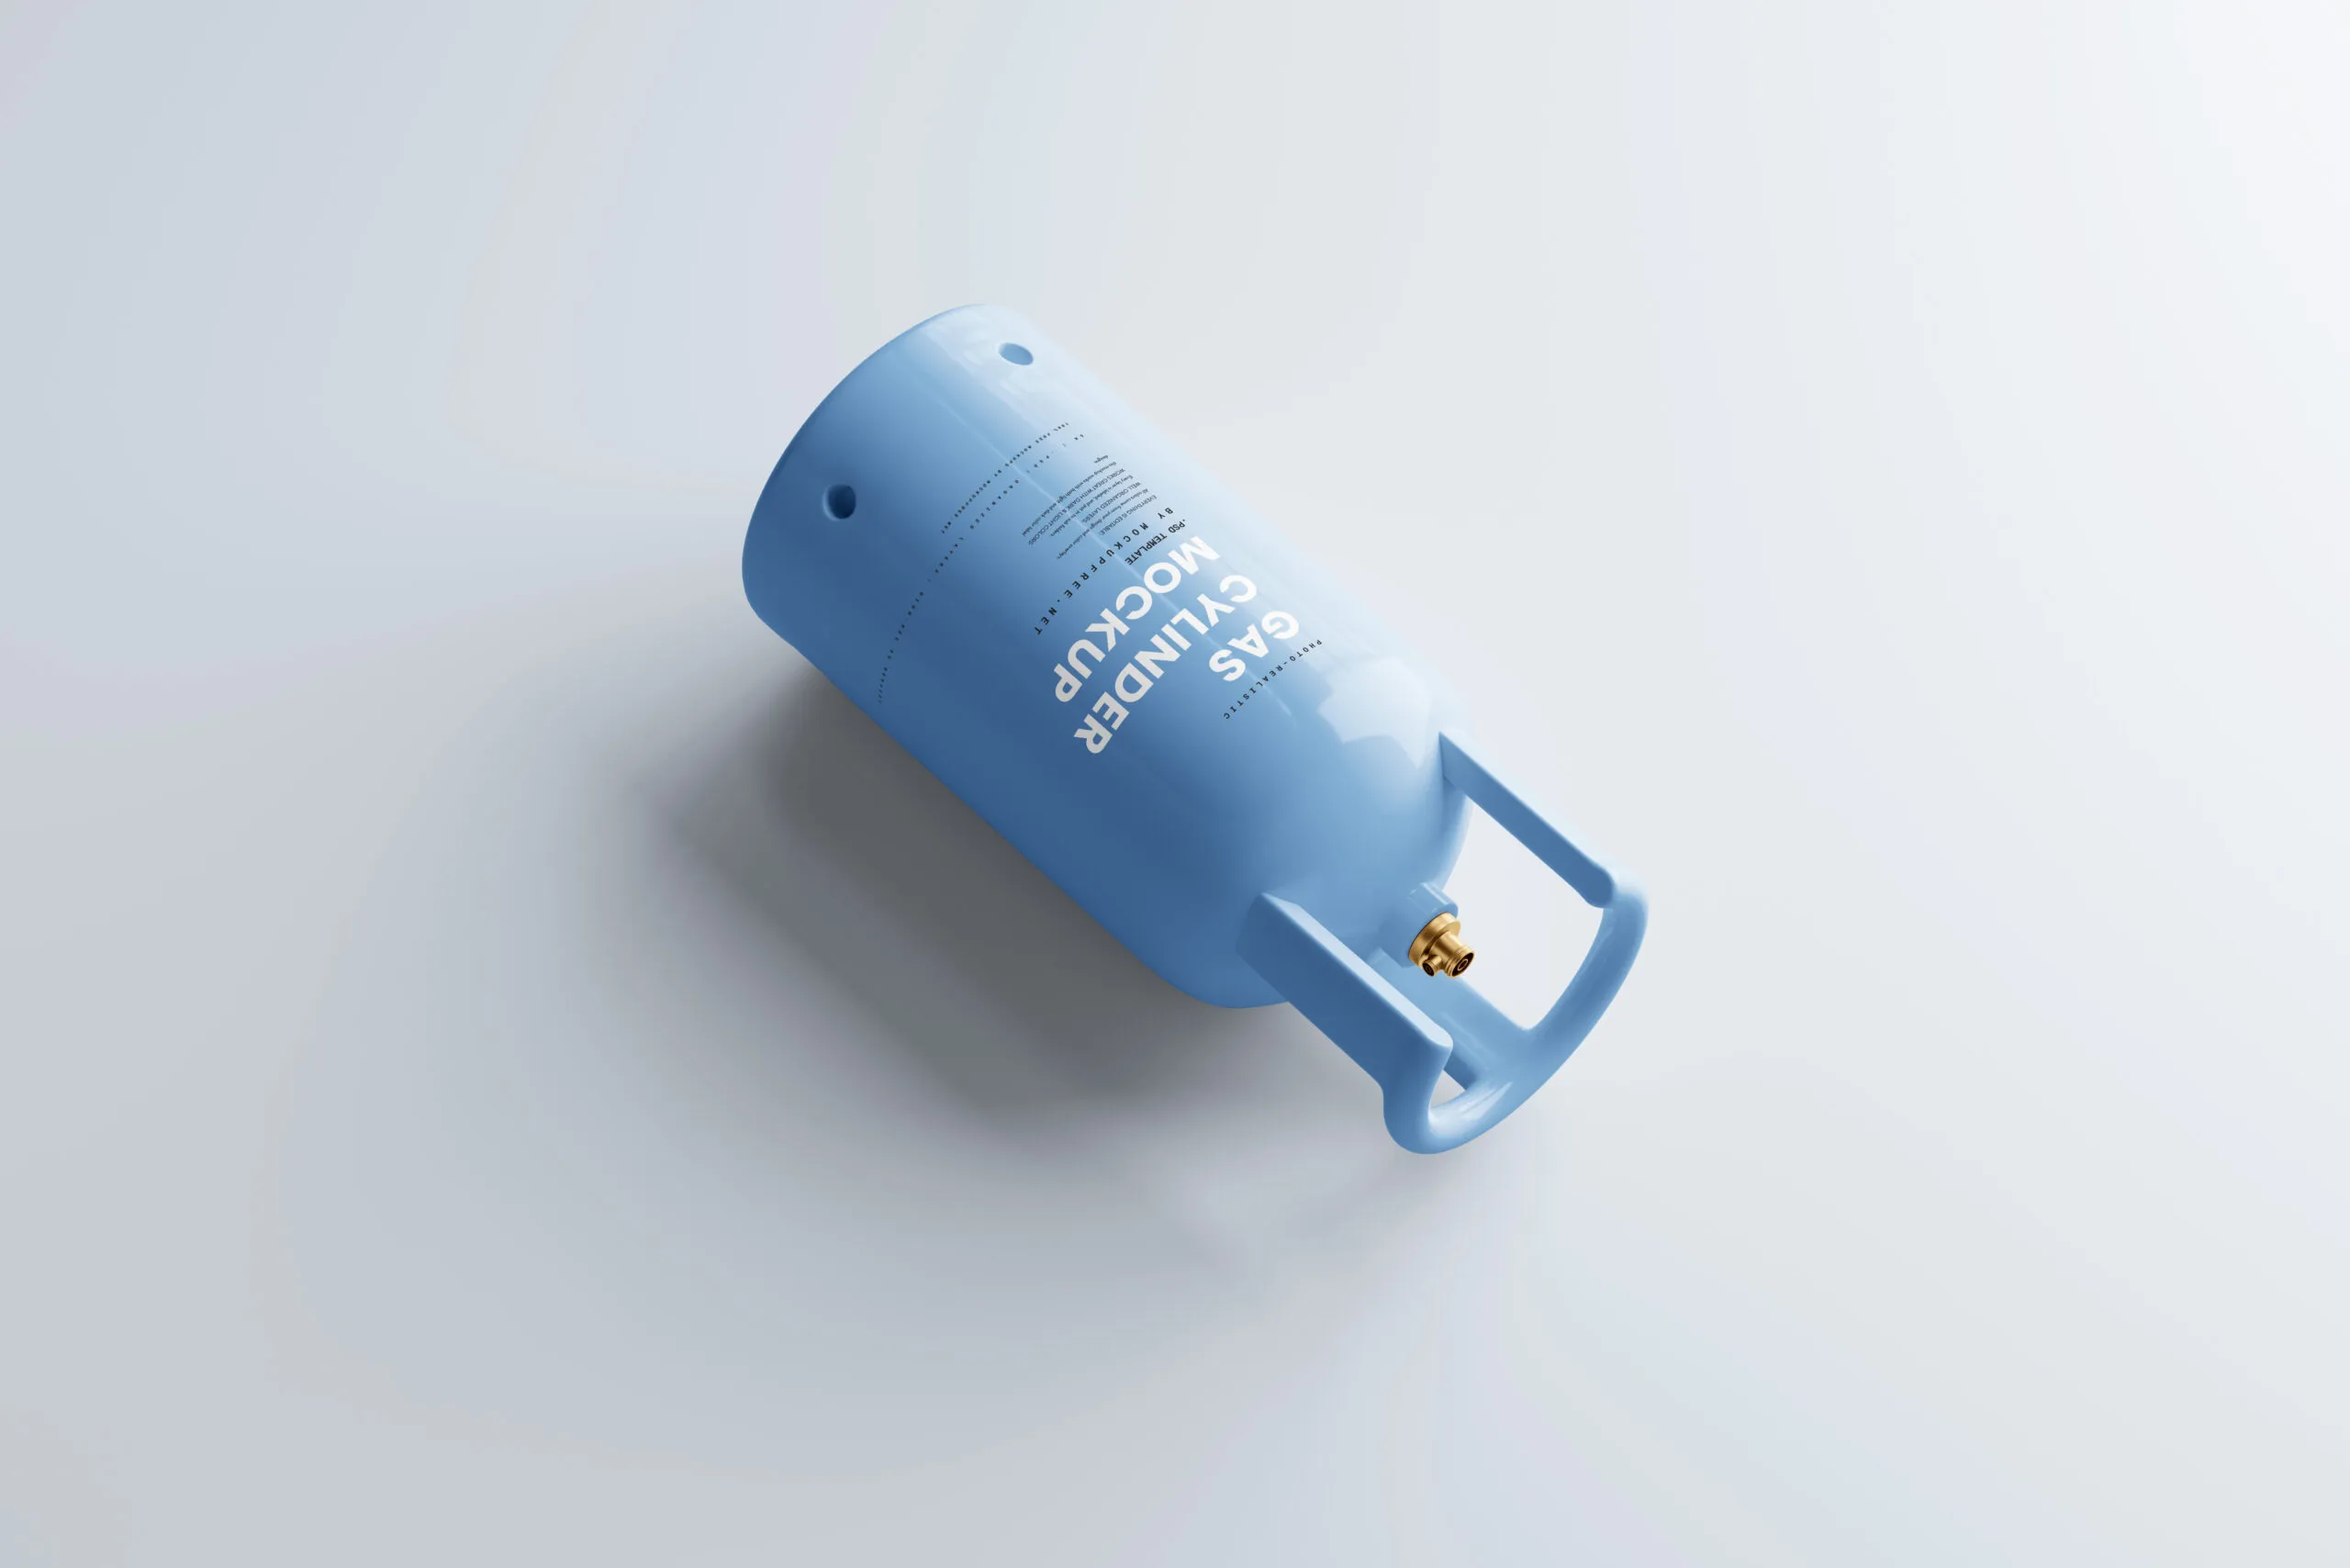 5 Gas Cylinder Mockup in Different Visions FREE PSD